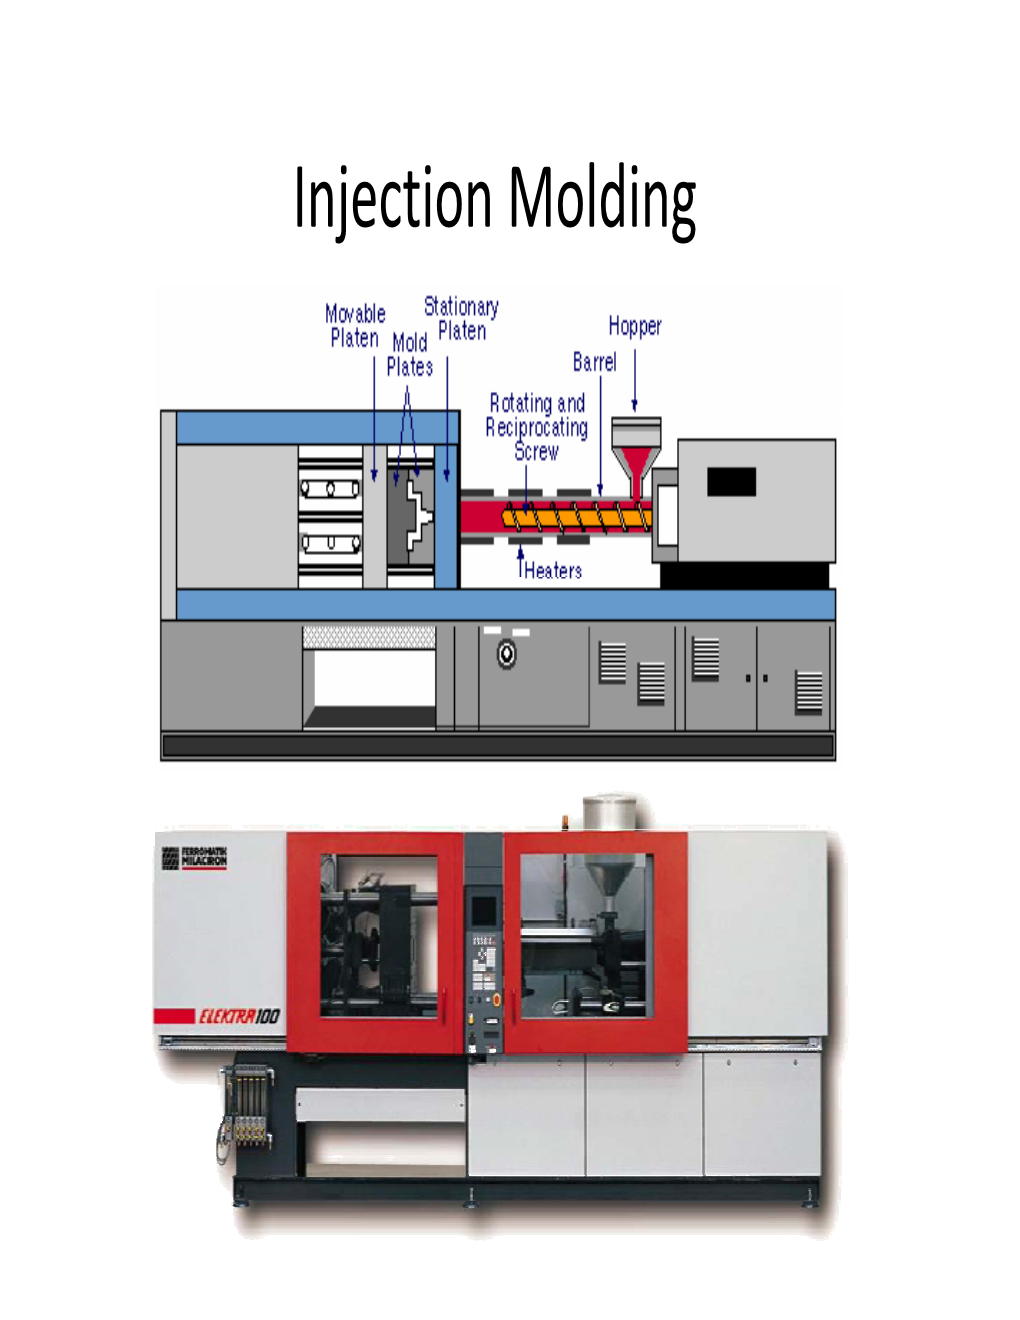 Injection Molding Injection Molding Product Examples Injection Molding Product Examples Injection Molding Machine Basics INJECTION MOULDING OPERATIONS